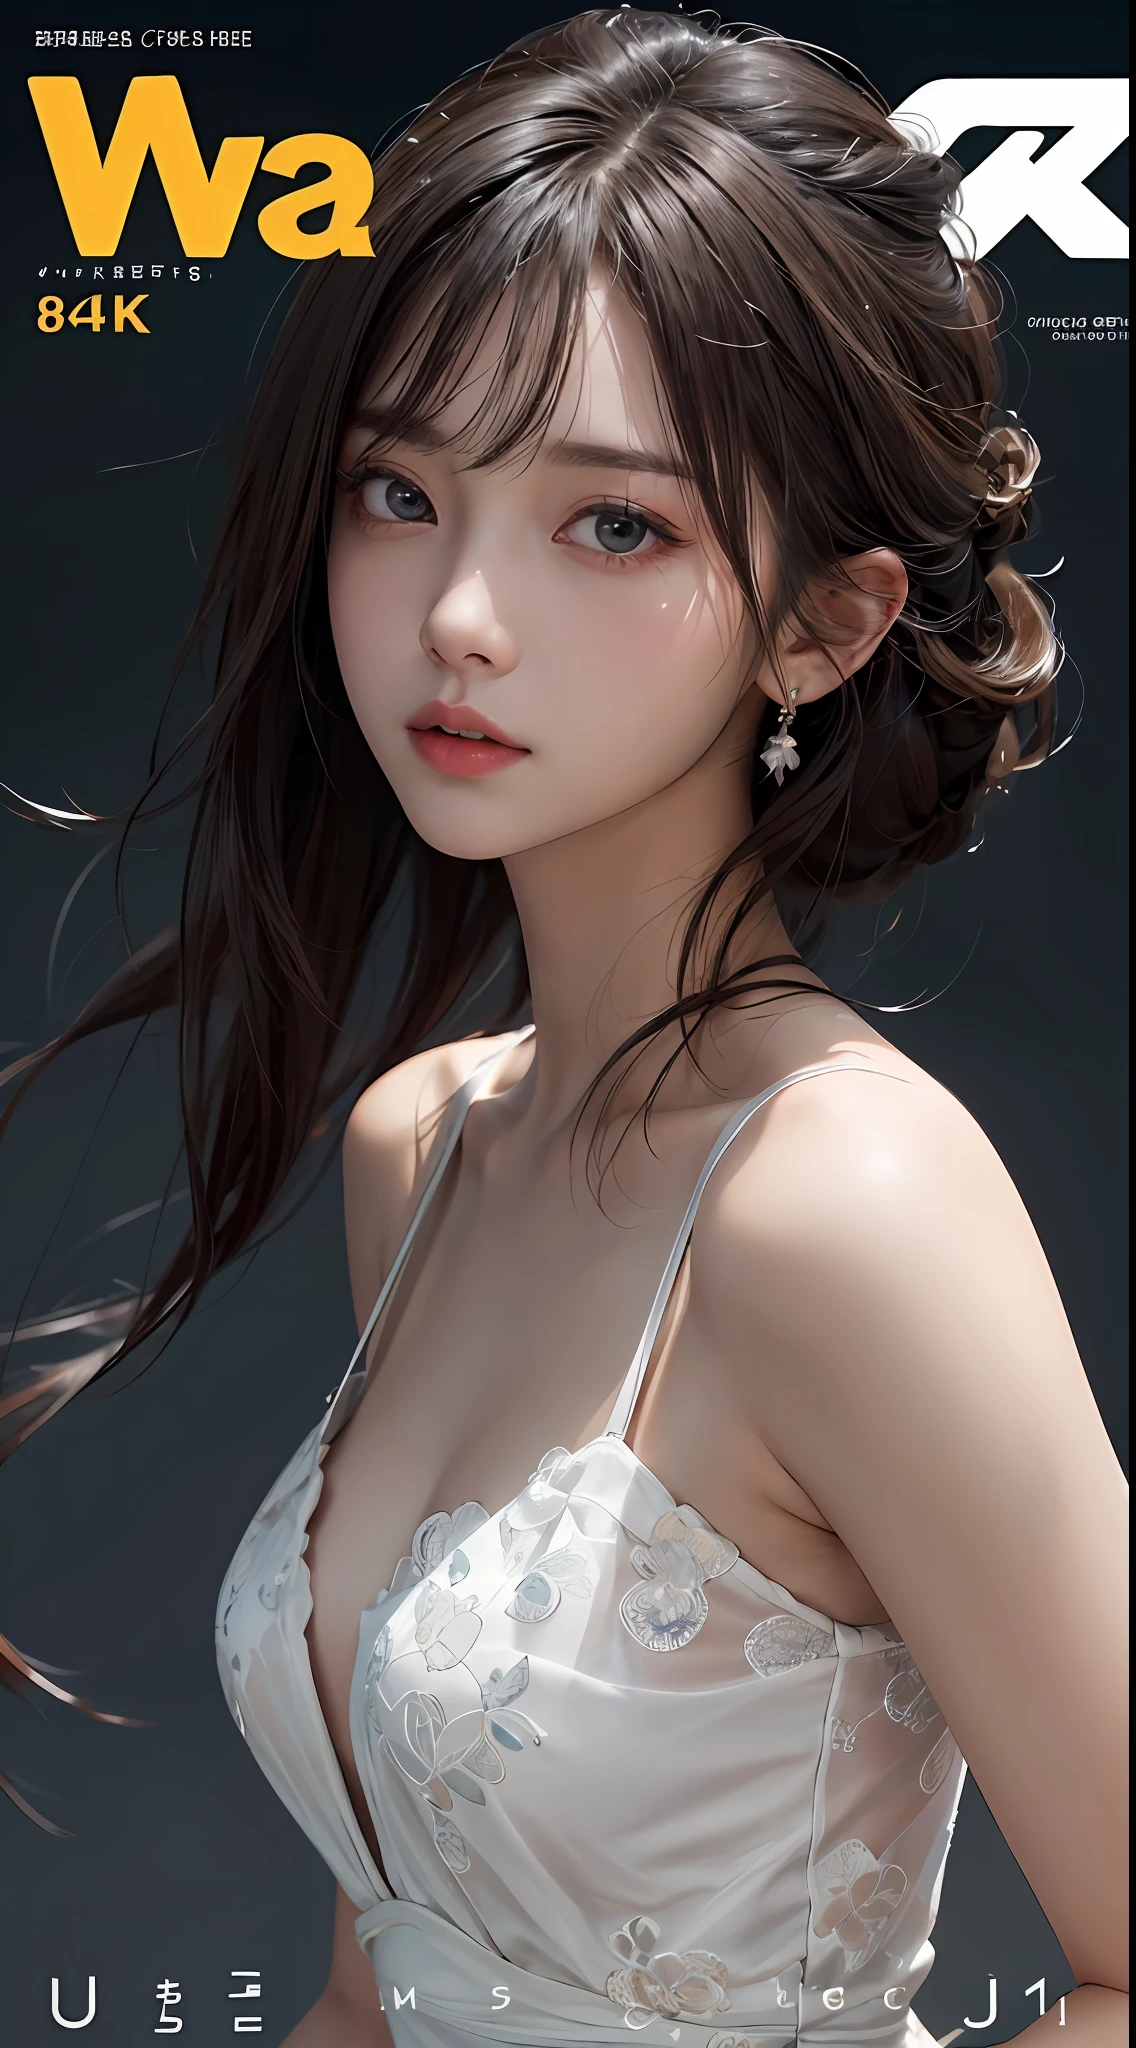 Masterpiece, 1 Beautiful Girl, Detailed Eyes, Swollen Eyes, Top Quality, Ultra High Resolution, (Reality: 1.4), Cinematic Lighting, Japanese, Asian Beauty, Korean, Very Beautiful, Beautiful Skin, Slender, Body Facing Forward, (Ultra Realistic), (High Resolution), (8K), (Very Detailed), ( Best Illustration), (beautifully detailed eyes), (super detailed), (wallpaper), detailed face, bright lighting, professional lighting, looking at viewer, facing straight ahead, white dress, 46 point slanted bangs, background is magazine cover,